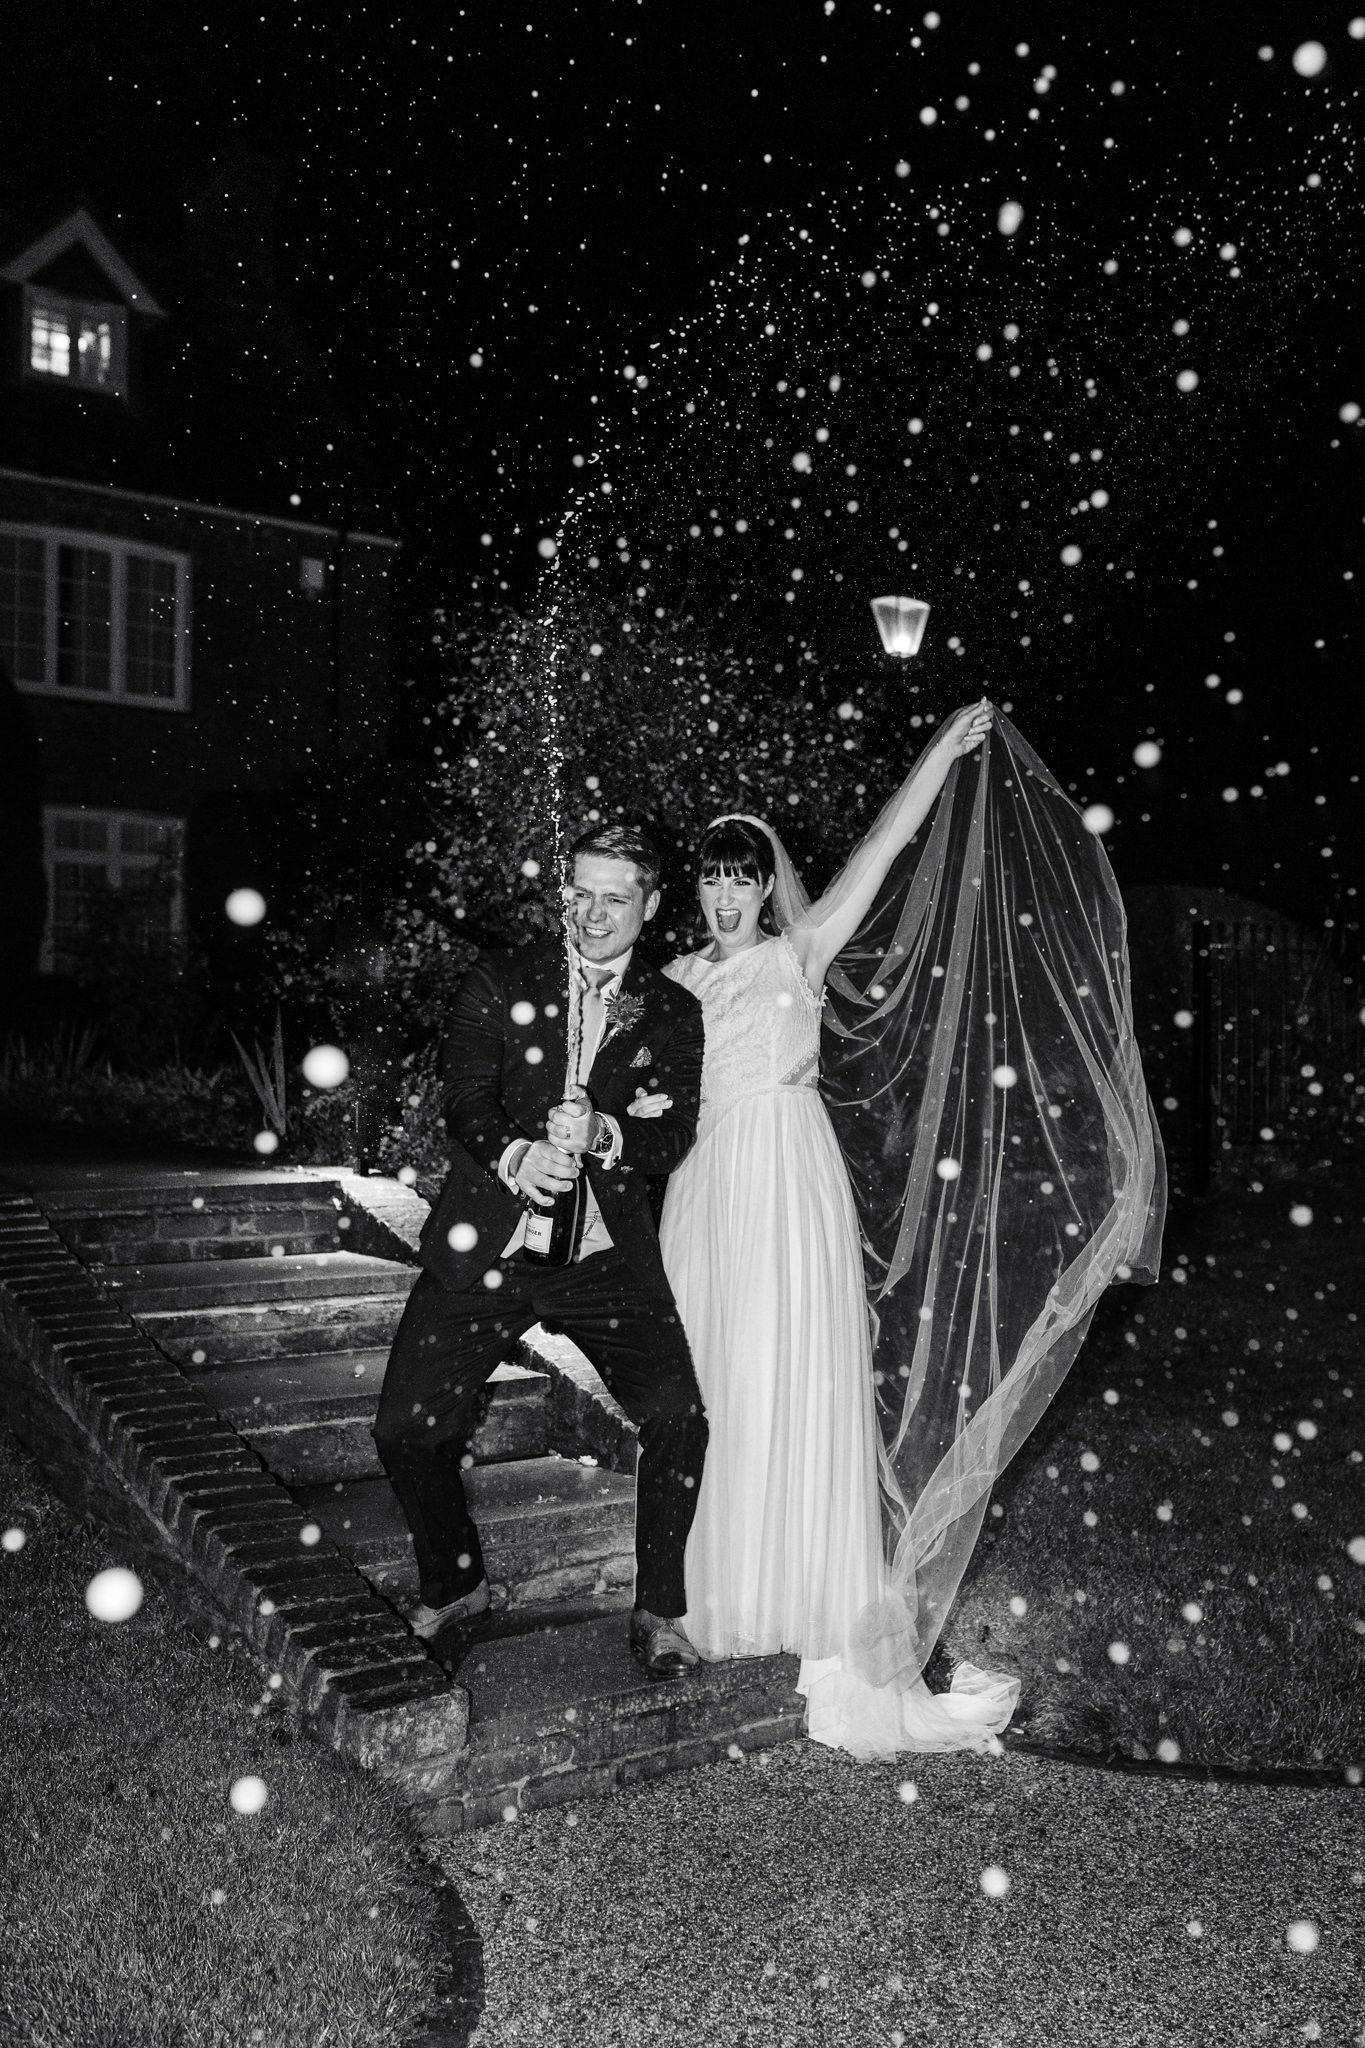 Champagne spray at wedding in black and white